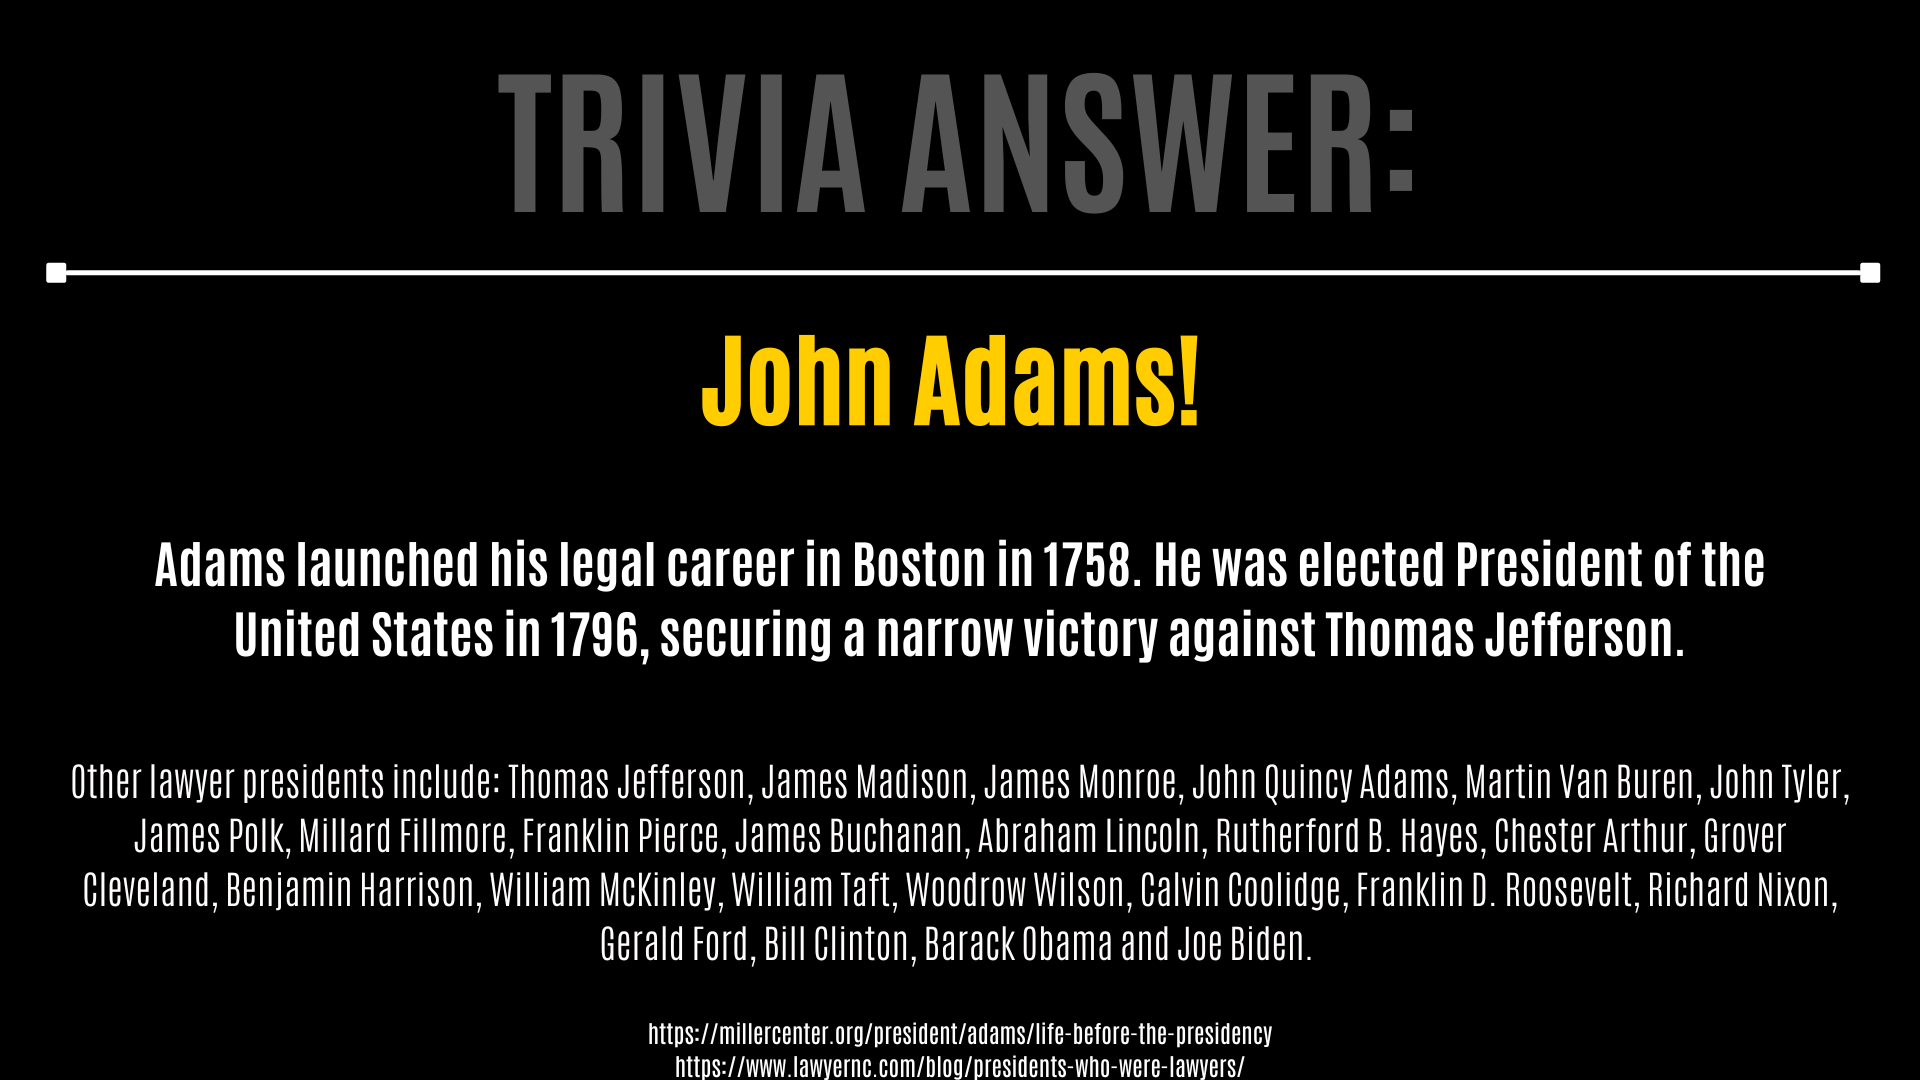 Trivia Answer: https://millercenter.org/president/adams/life-before-the-presidency https://www.lawyernc.com/blog/presidents-who-were-lawyers/ John Adams! Other lawyer presidents include: Thomas Jefferson, James Madison, James Monroe, John Quincy Adams, Martin Van Buren, John Tyler, James Polk, Millard Fillmore, Franklin Pierce, James Buchanan, Abraham Lincoln, Rutherford B. Hayes, Chester Arthur, Grover Cleveland, Benjamin Harrison, William McKinley, William Taft, Woodrow Wilson, Calvin Coolidge, Franklin D. Roosevelt, Richard Nixon, Gerald Ford, Bill Clinton, Barack Obama and Joe Biden. Adams launched his legal career in Boston in 1758. He was elected President of the United States in 1796, securing a narrow victory against Thomas Jefferson.